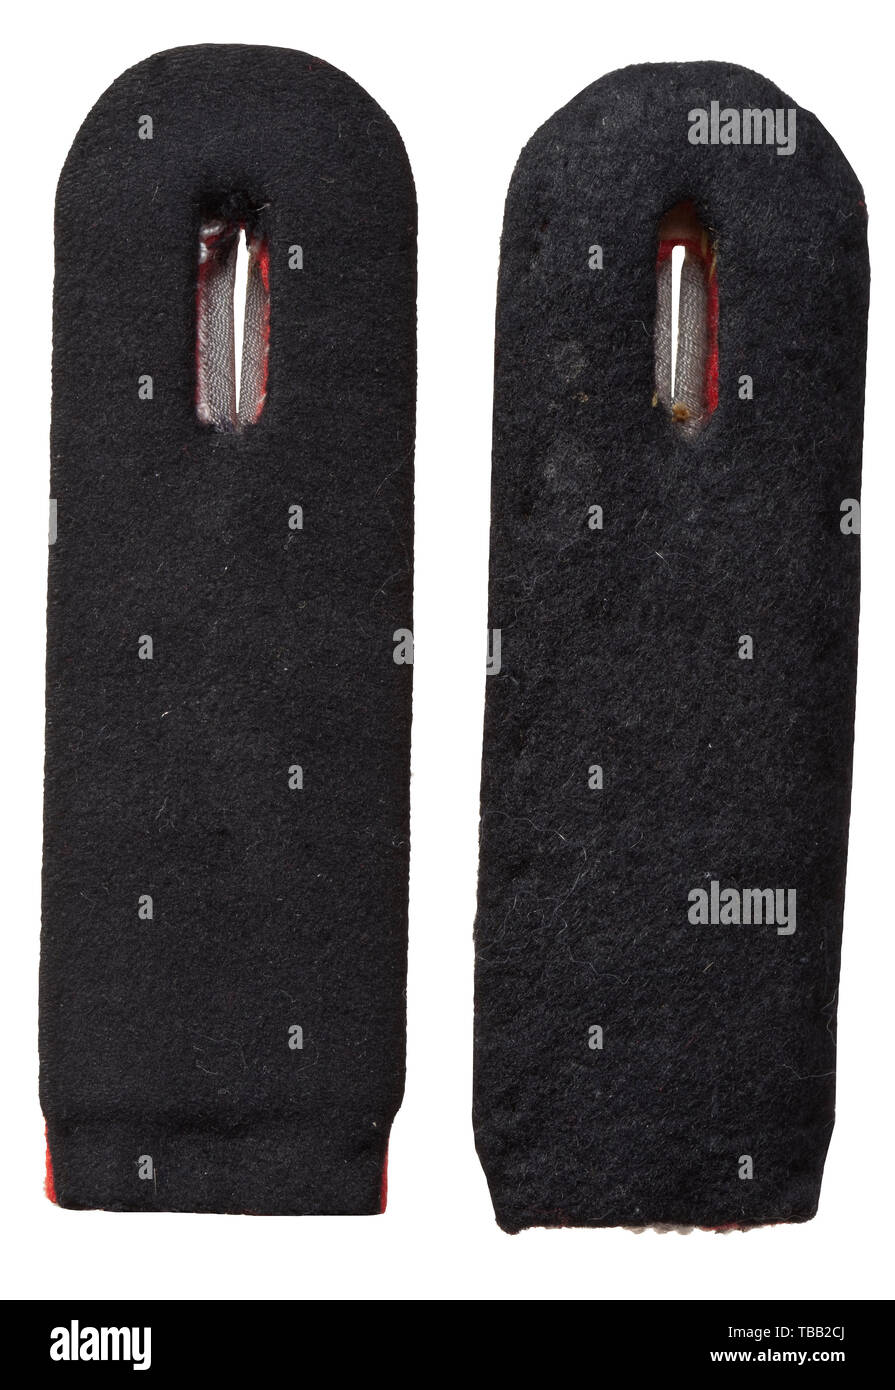 Two shoulder boards 'Untersturmführer' of the artillery Red piping, sew-in type, slightly used. historic, historical, 20th century, 1930s, 1940s, Waffen-SS, armed division of the SS, armed service, armed services, NS, National Socialism, Nazism, Third Reich, German Reich, Germany, military, militaria, utensil, piece of equipment, utensils, object, objects, stills, clipping, clippings, cut out, cut-out, cut-outs, fascism, fascistic, National Socialist, Nazi, Nazi period, Editorial-Use-Only Stock Photo